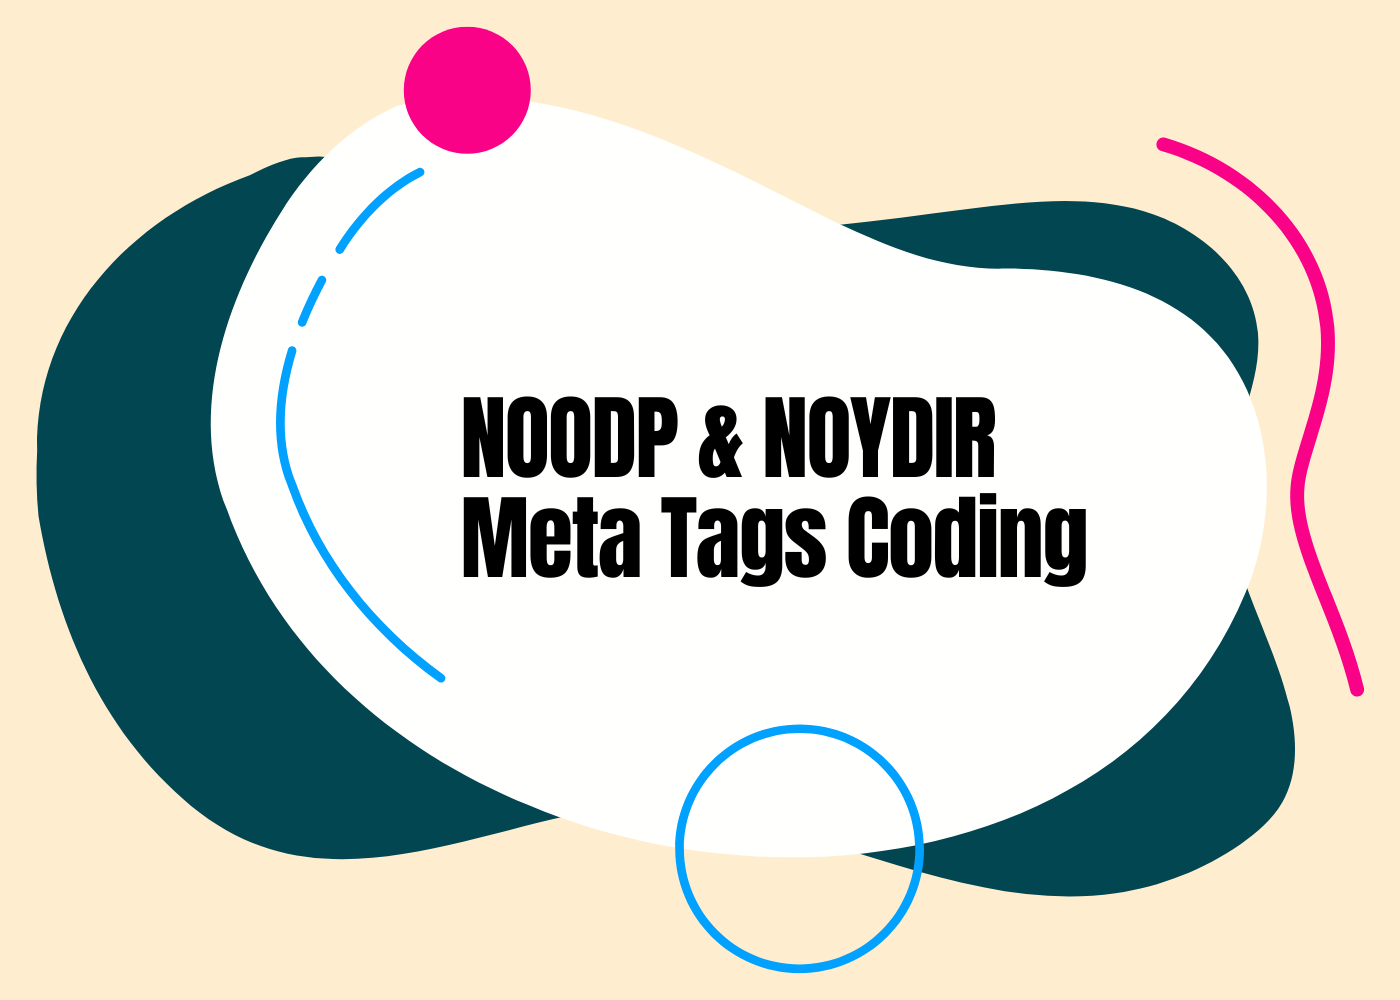 What Are NOODP & NOYDIR Meta Tags?